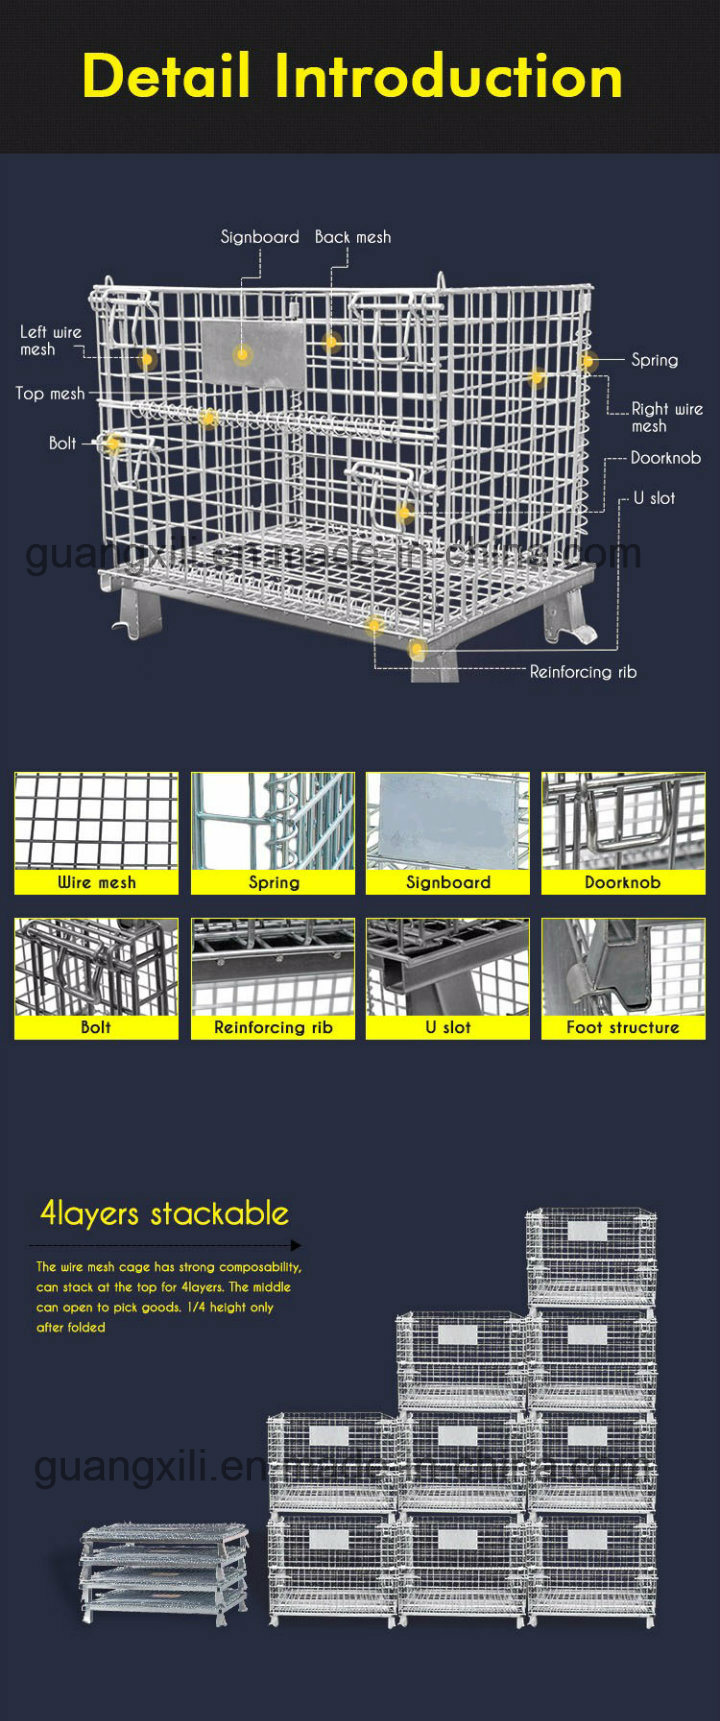 Metal Steel Crates / Wire Rolling Storage Cage